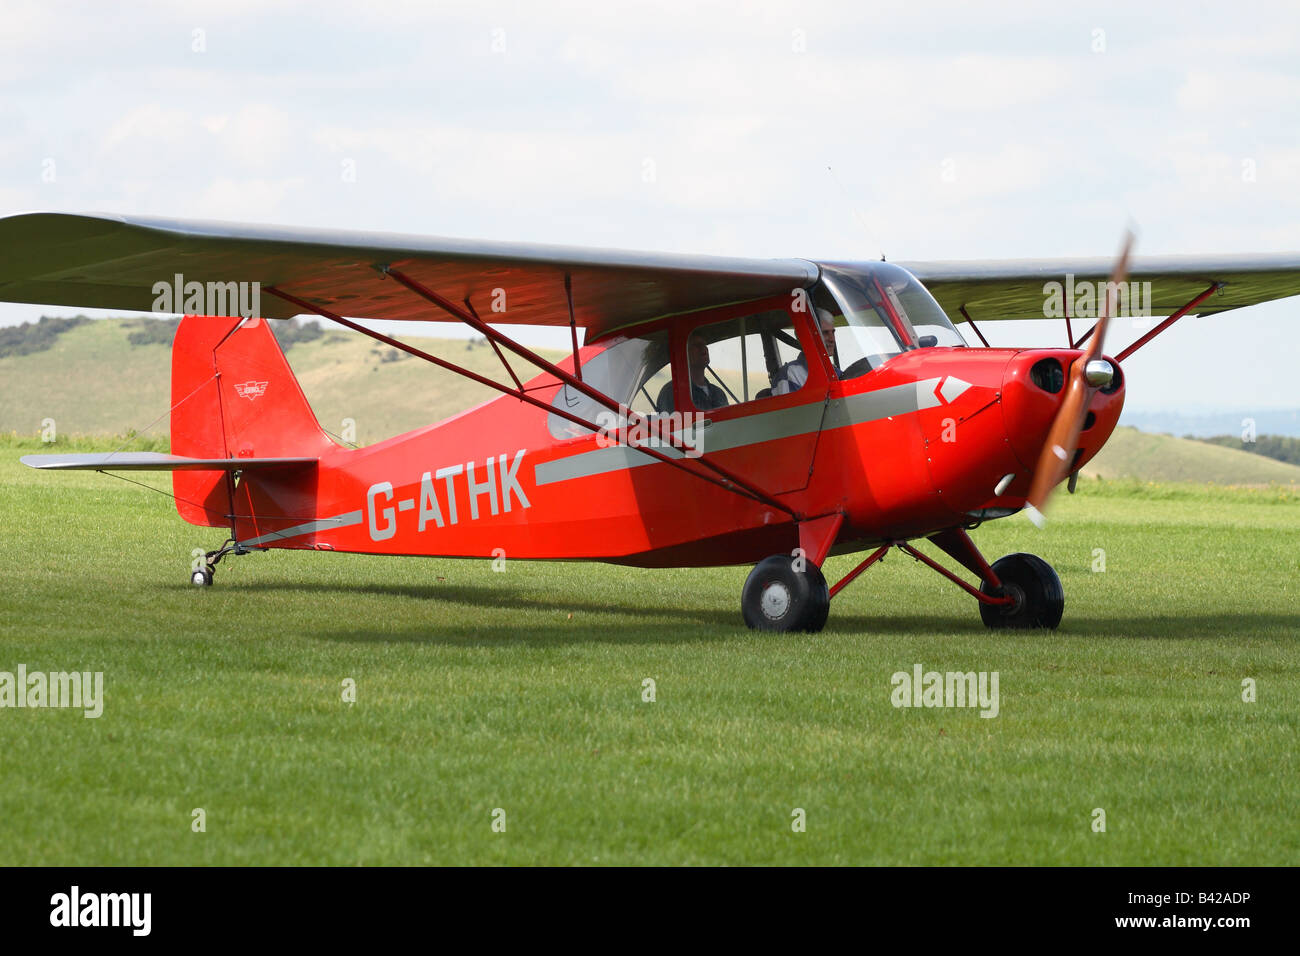 whisky levering Elendighed Aeronca 7AC Champion vintage classic light aircraft designed in the 1940s  Stock Photo - Alamy